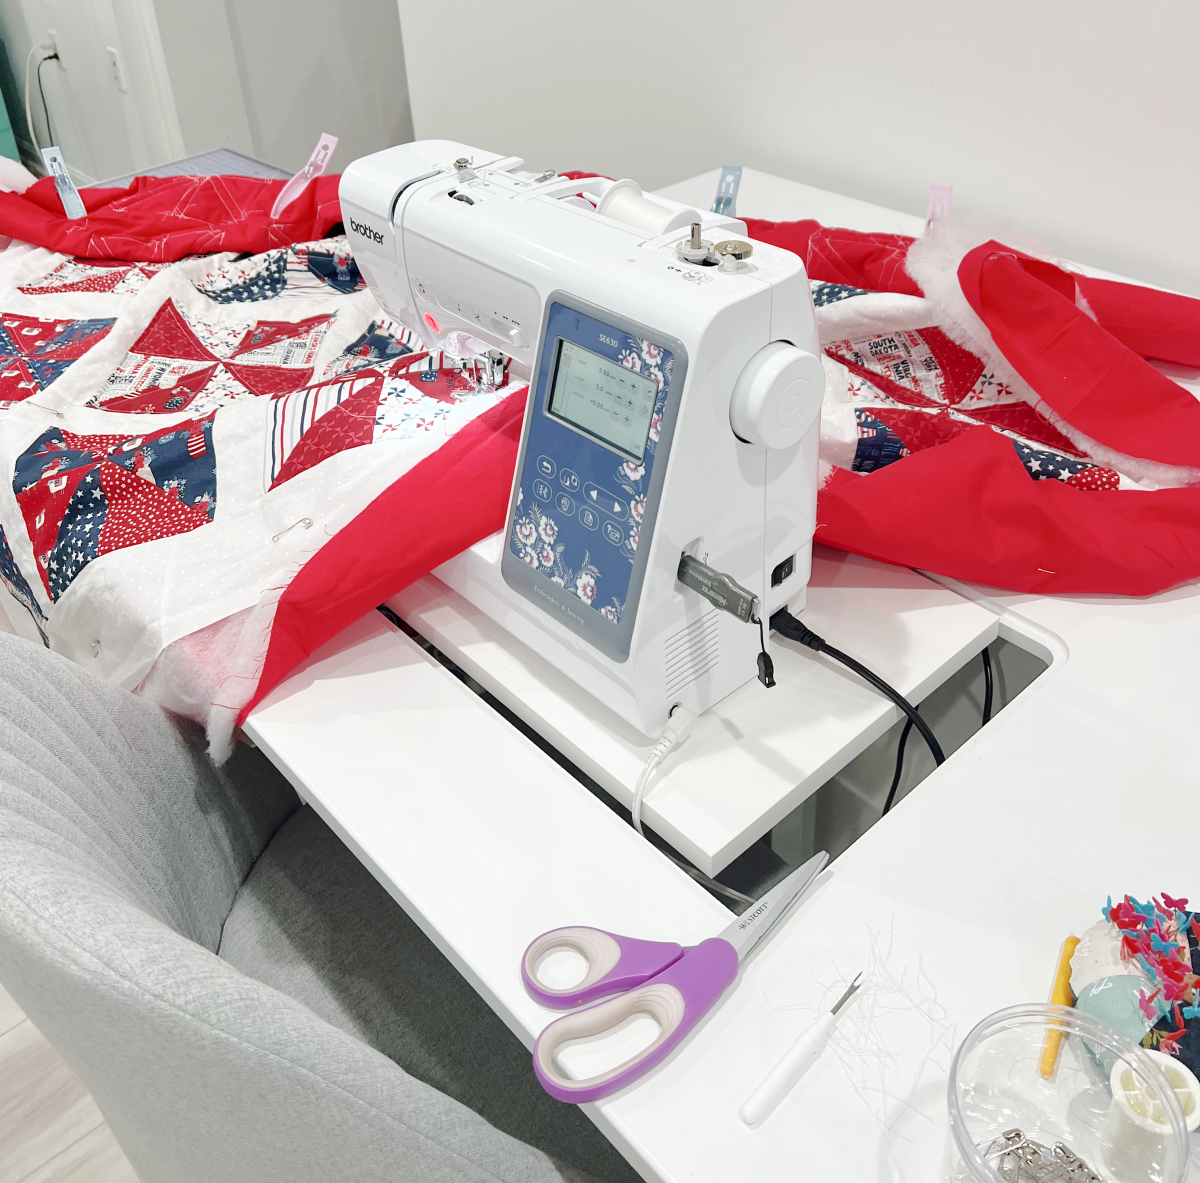 Image contains a sewing machine with an in-progress patriotic quilt spread out around it.